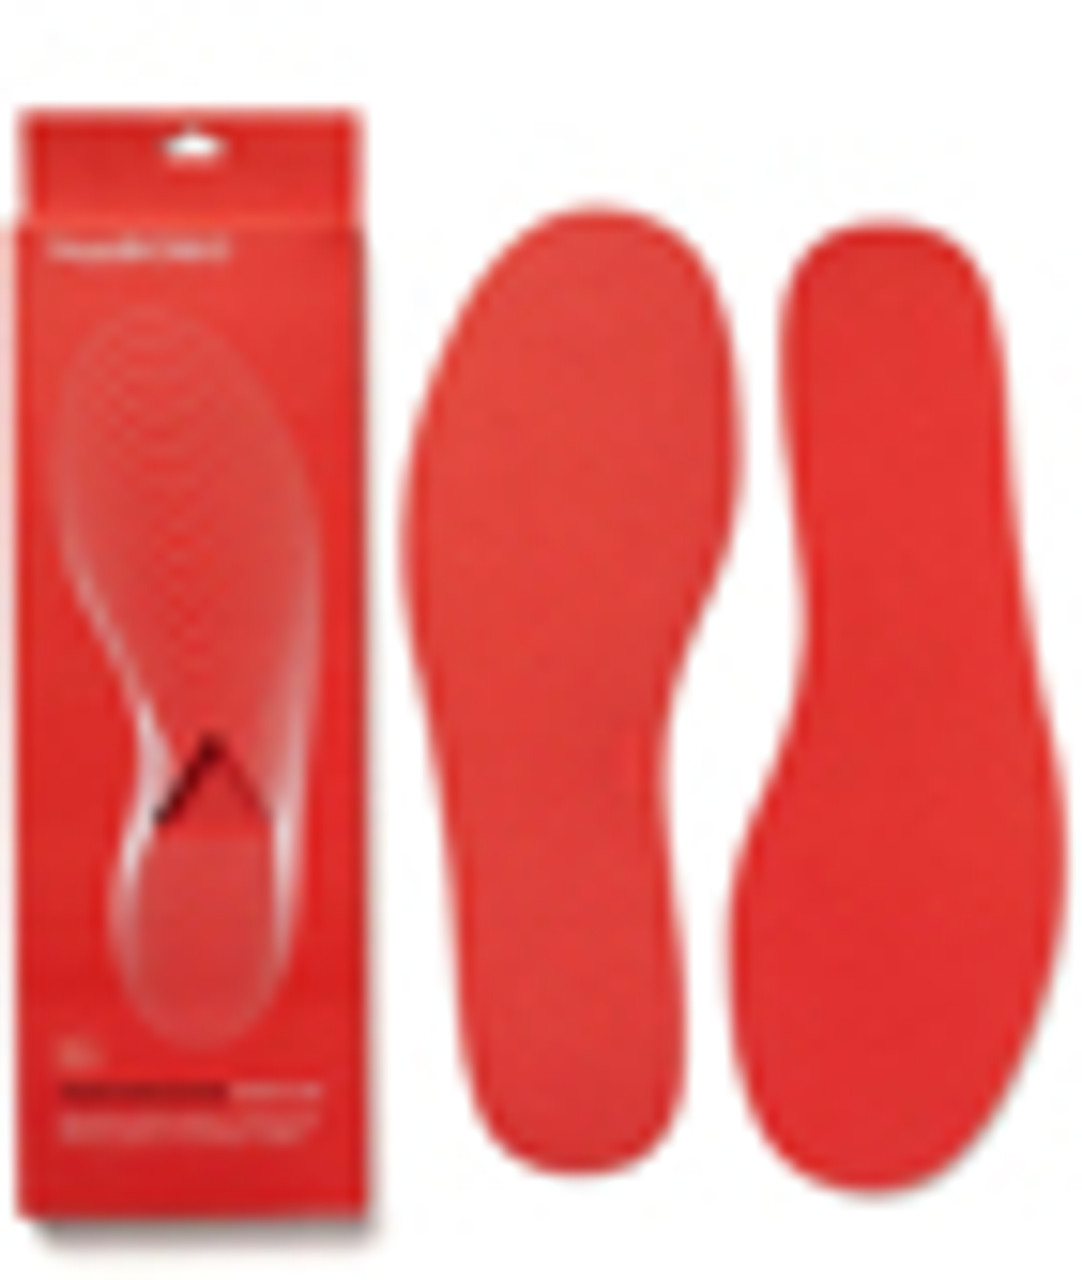 Naboso NBPR Performance Insoles S-XL